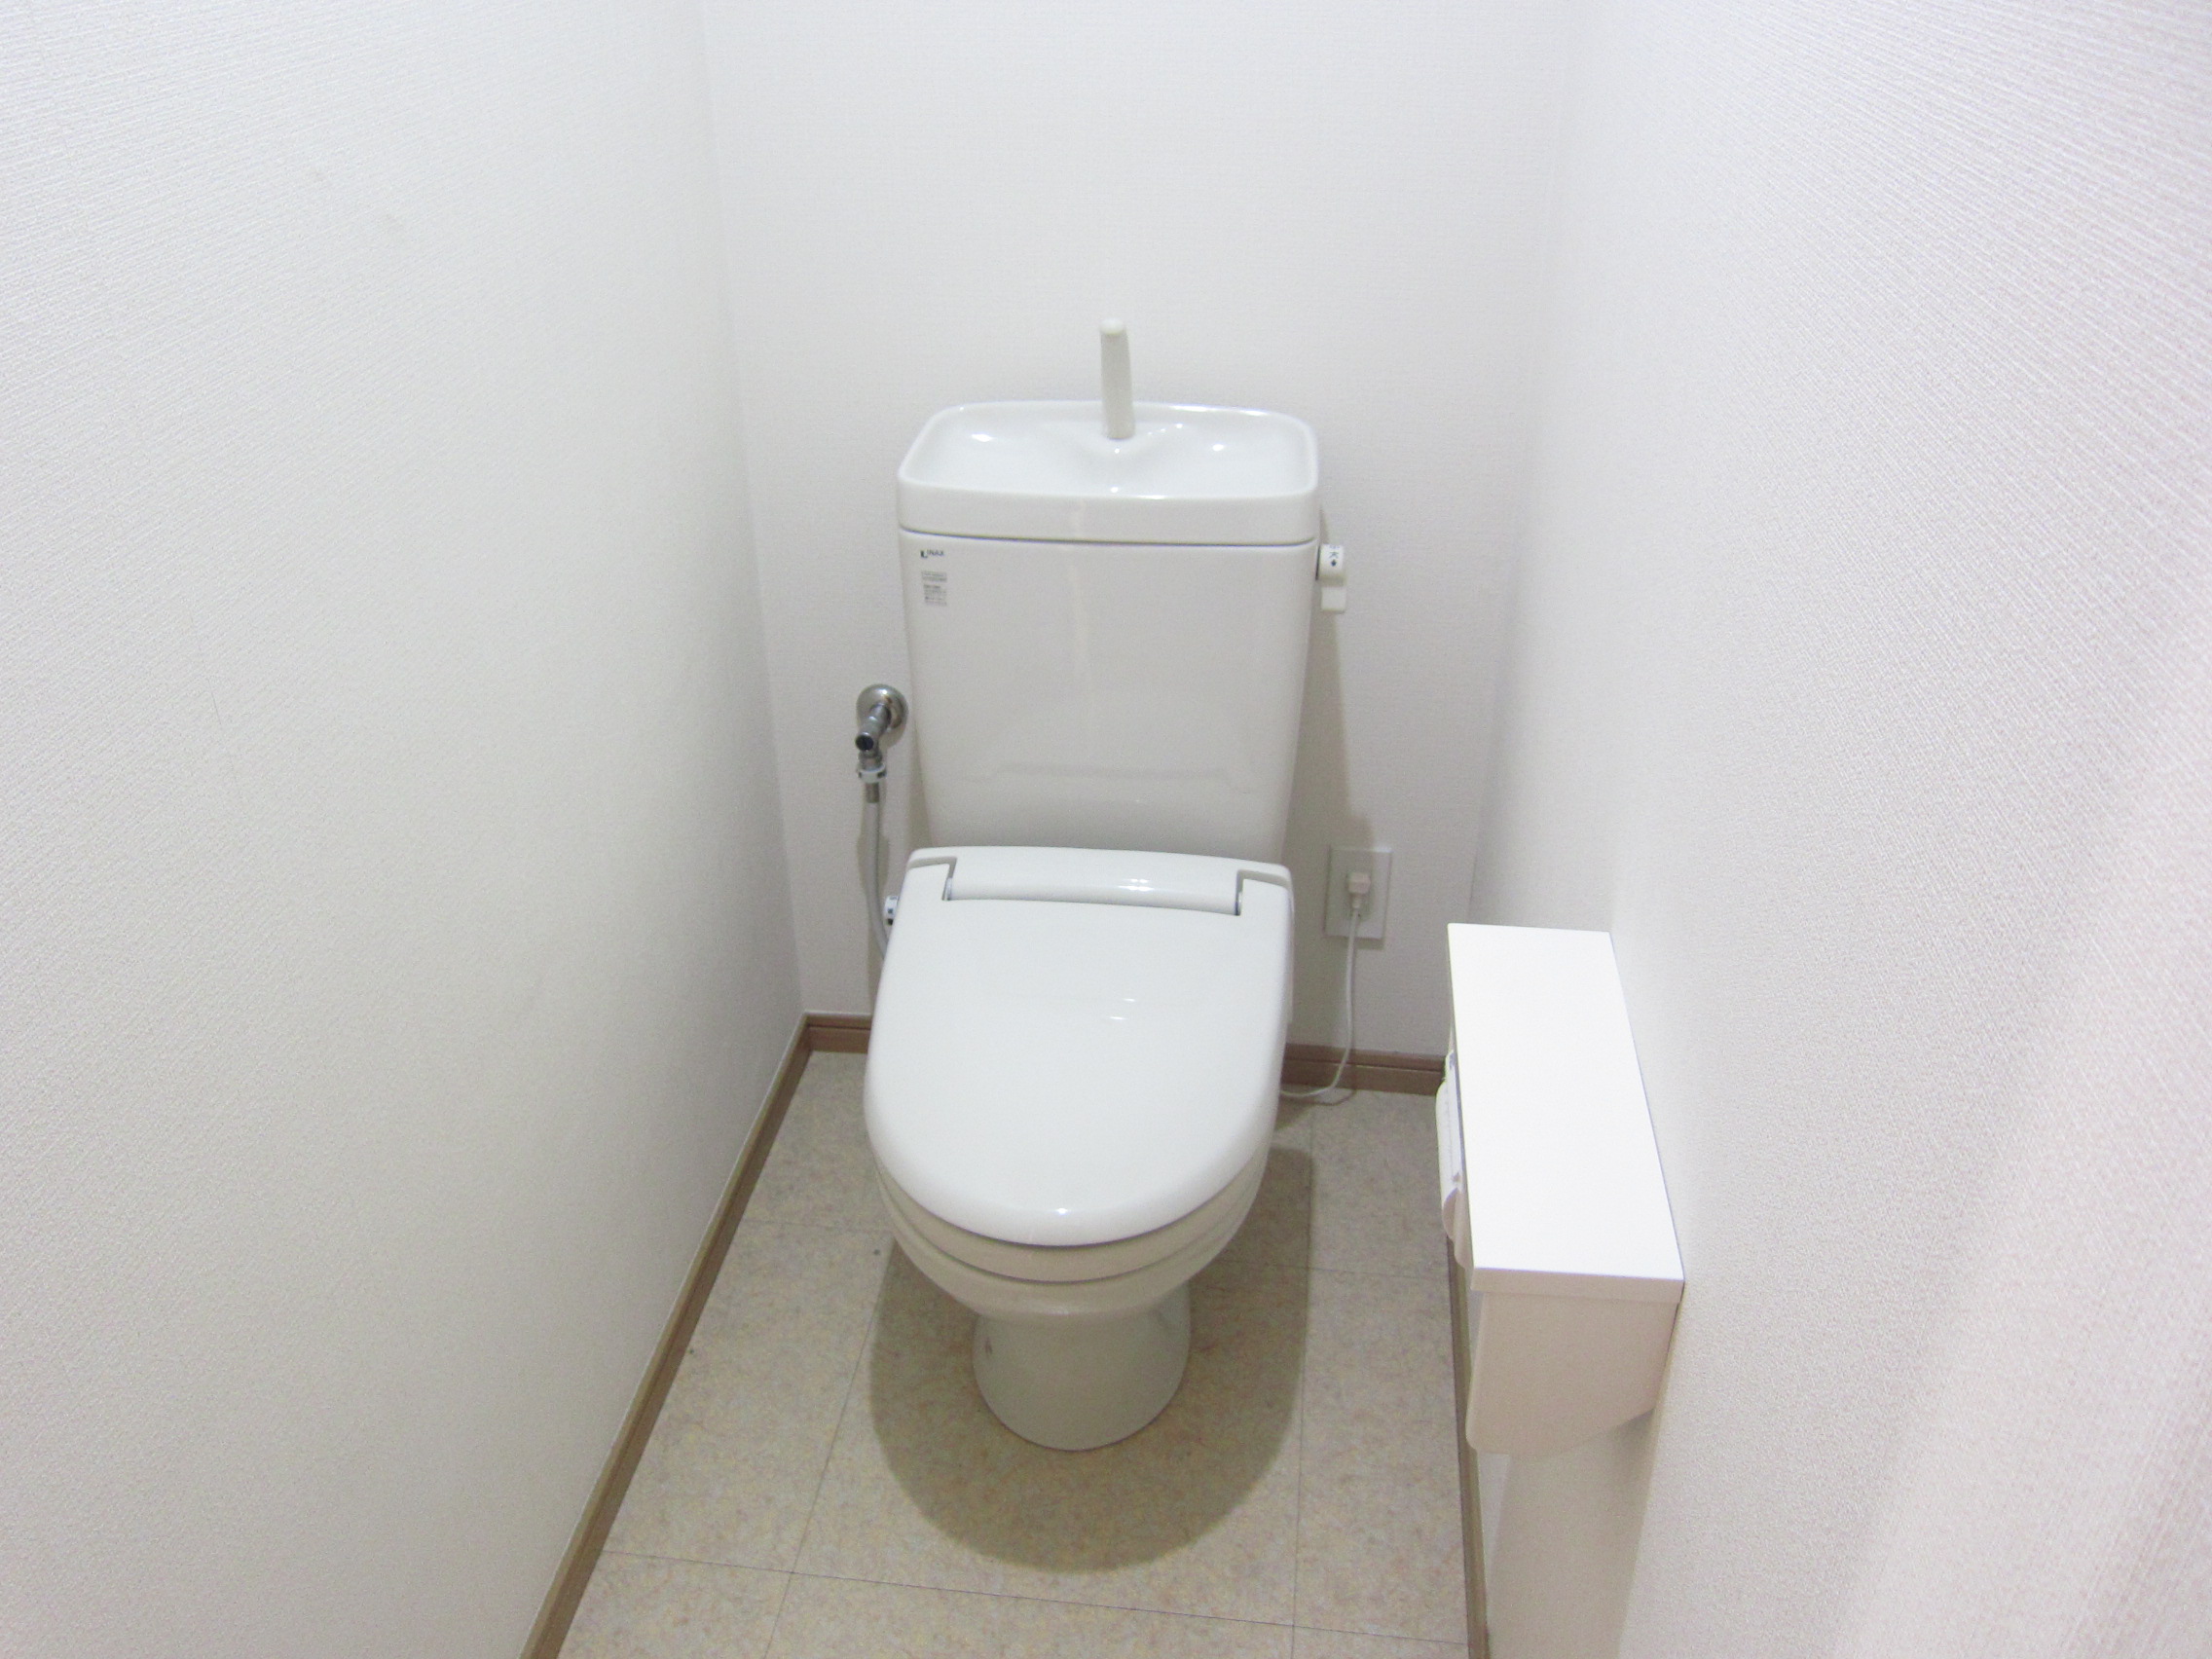 Toilet. It is a simple structure.